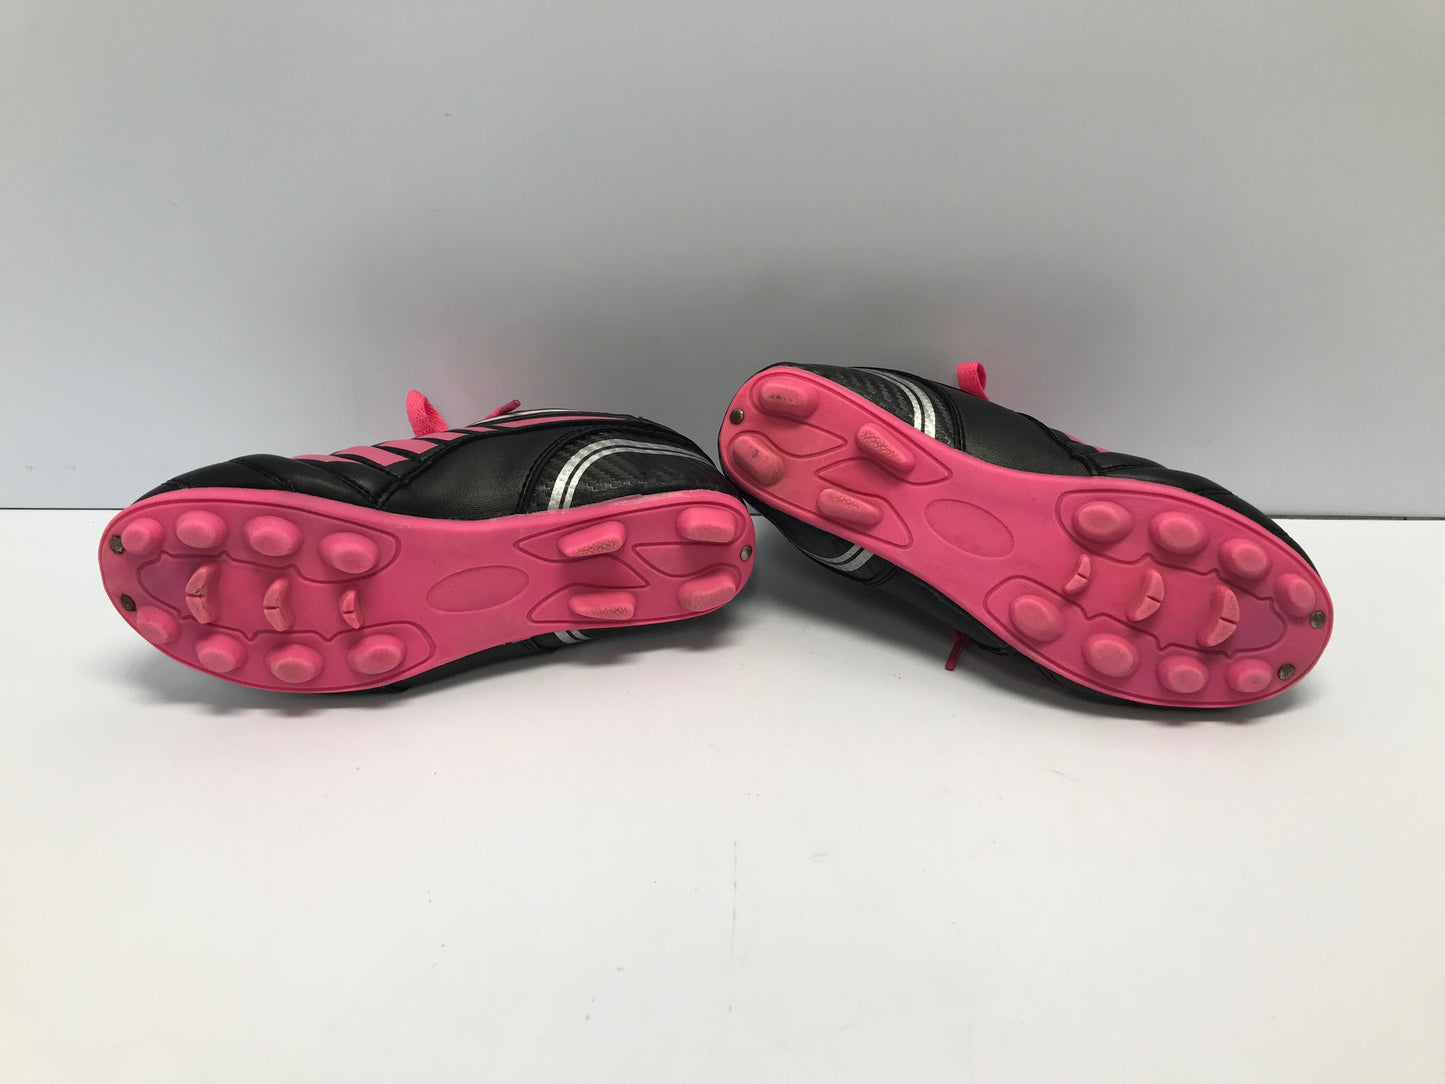 Soccer Shoes Cleats Child Size 3 Athletic Pink Black